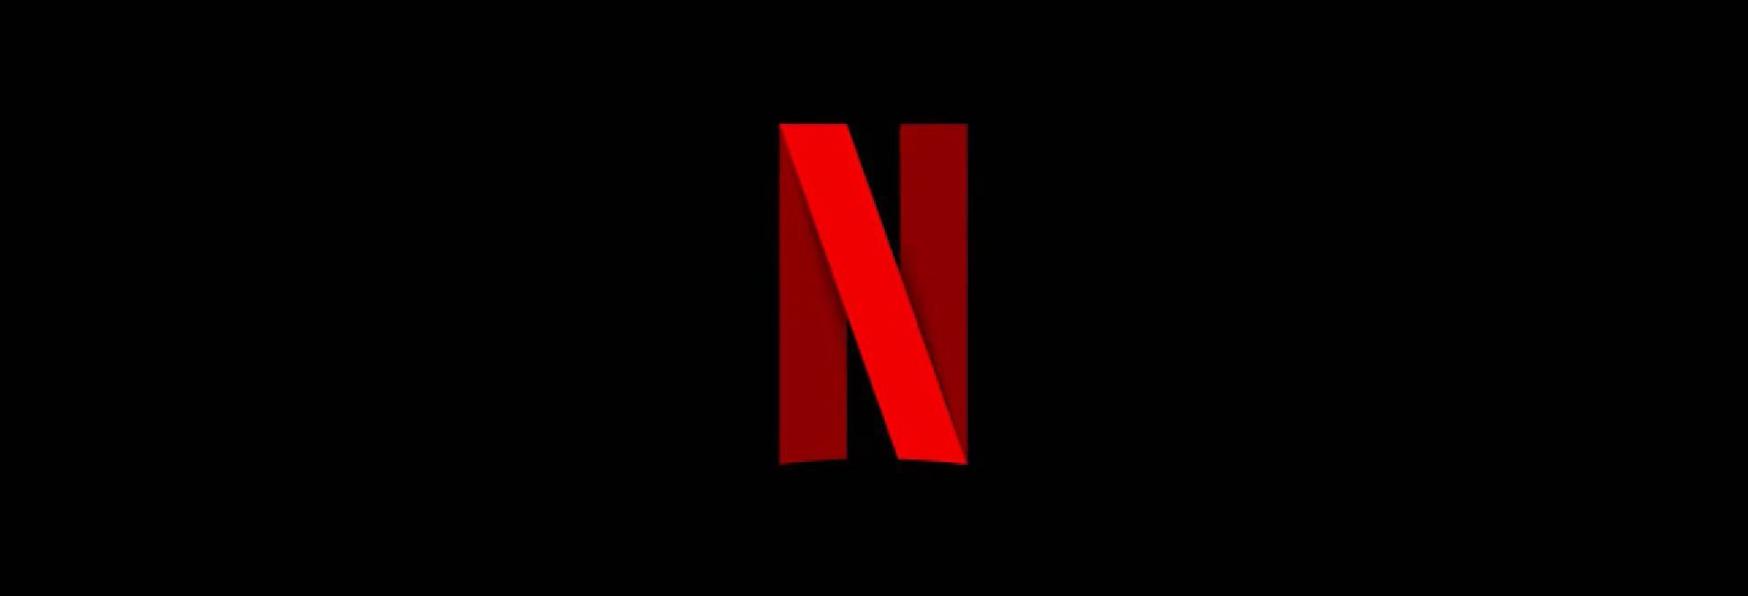 Advertising on Netflix is ​​about to become reality: the Platform confirms the arrival of Low Cost Subscriptions